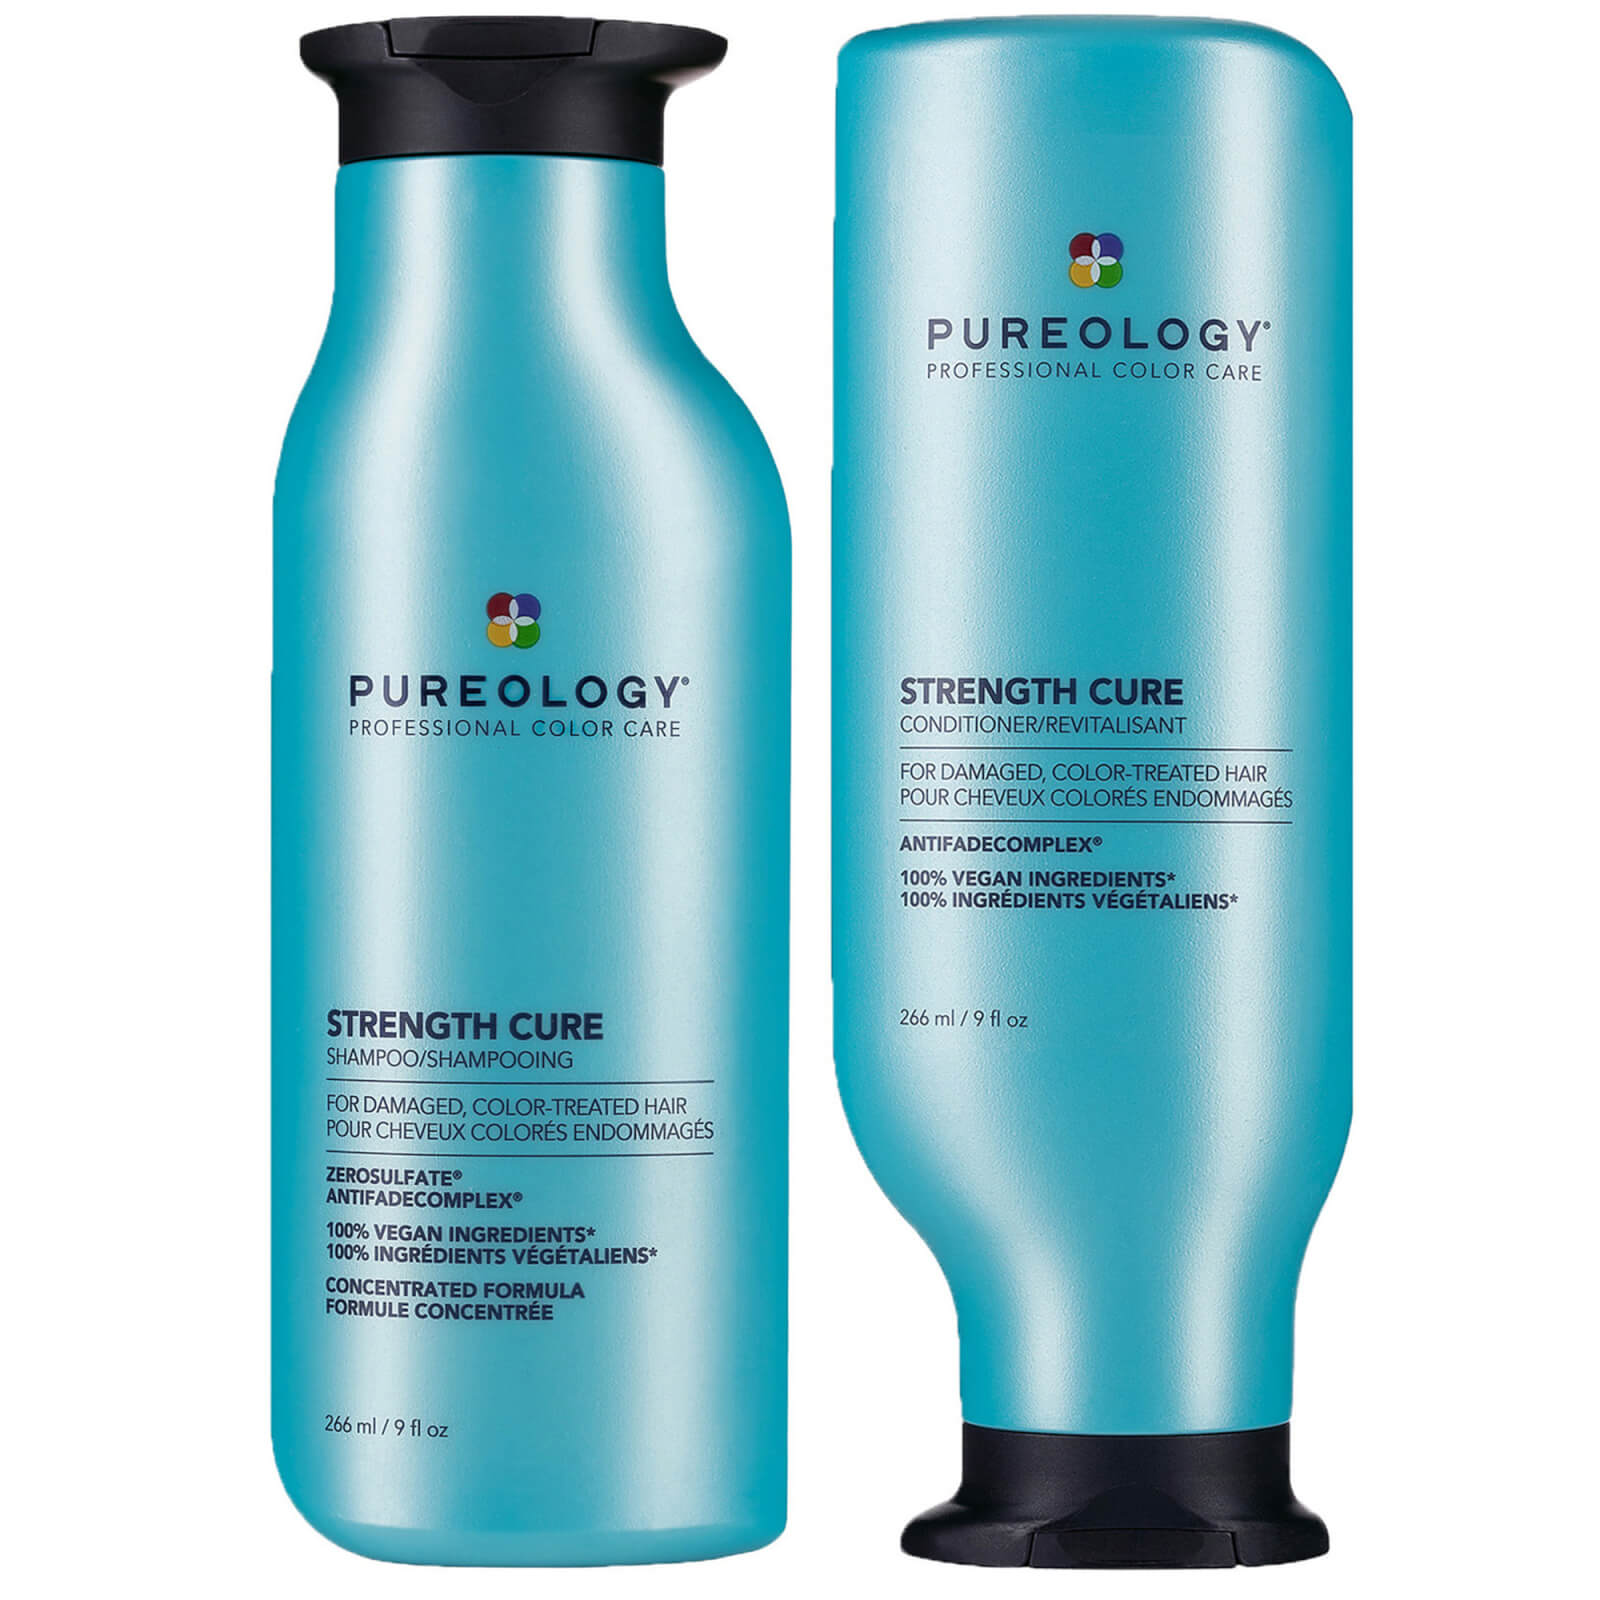 Pureology Strength Cure Shampoo and Conditioner Bundle for Damaged Hair, Sulphate Free for a Gentle 